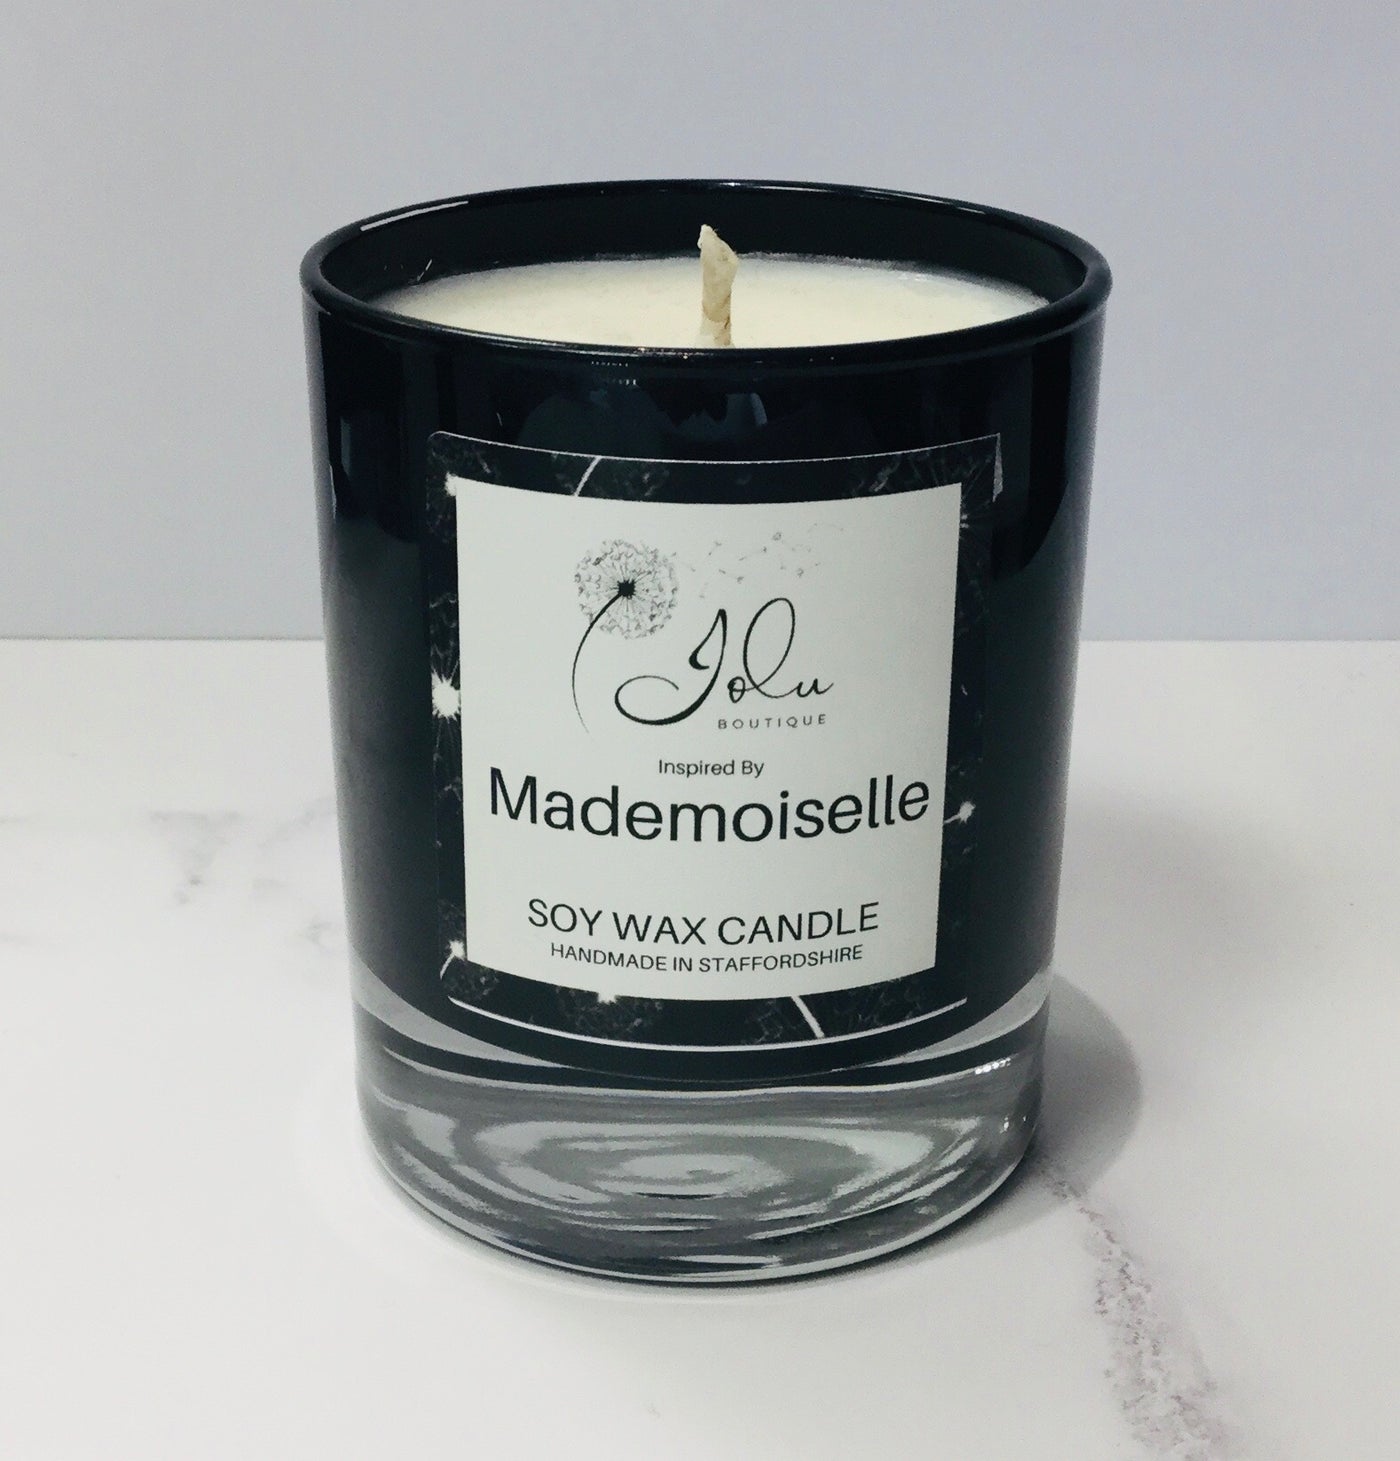 Jolu Boutique Inspired by Mademoiselle Soy Wax Candle